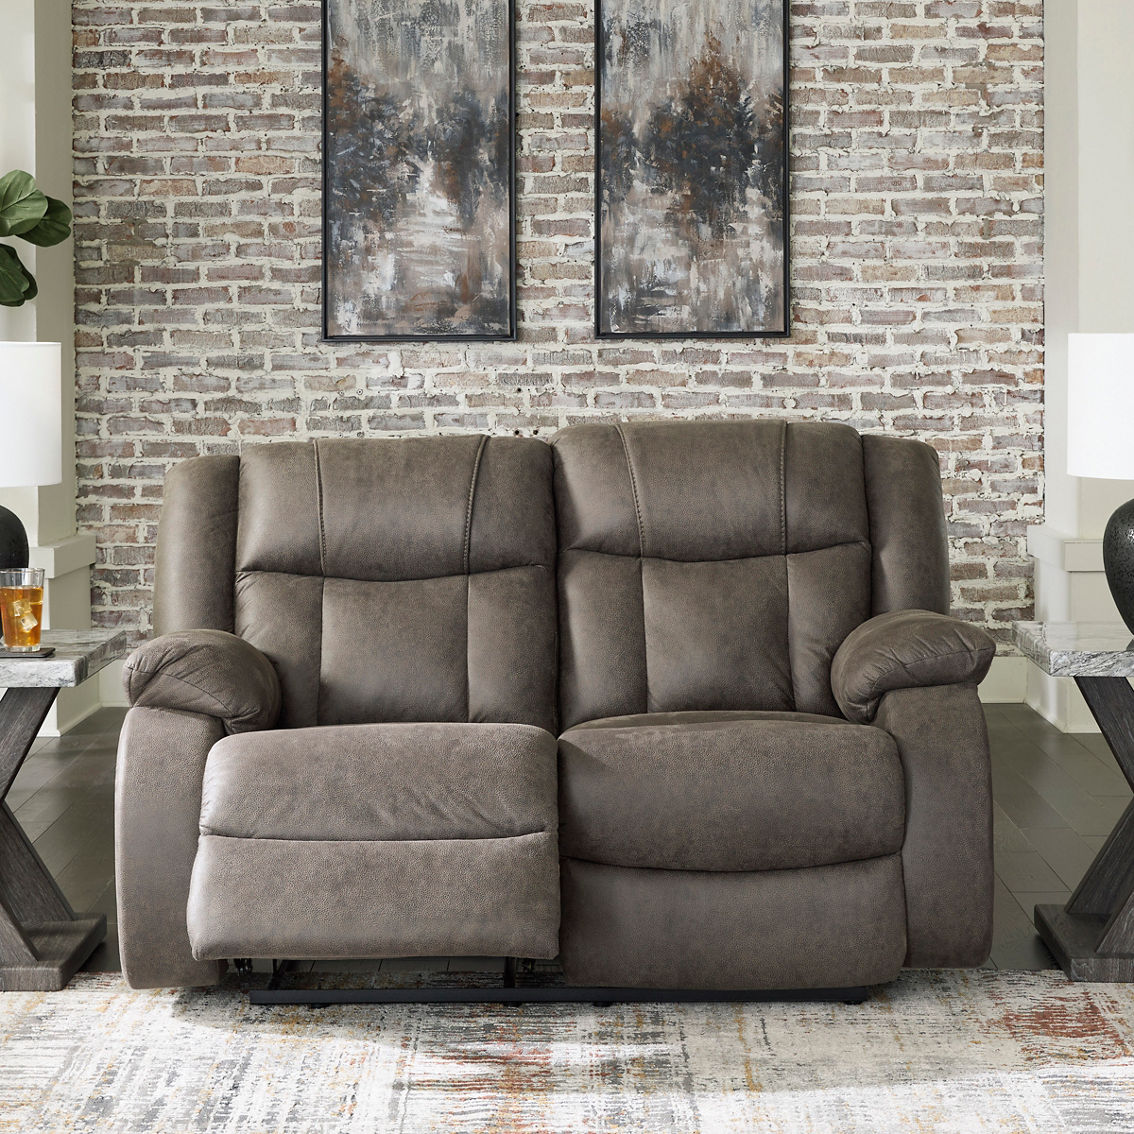 Signature Design by Ashley First Base 3 pc. Reclining Set: Sofa, Loveseat, Recliner - Image 3 of 4